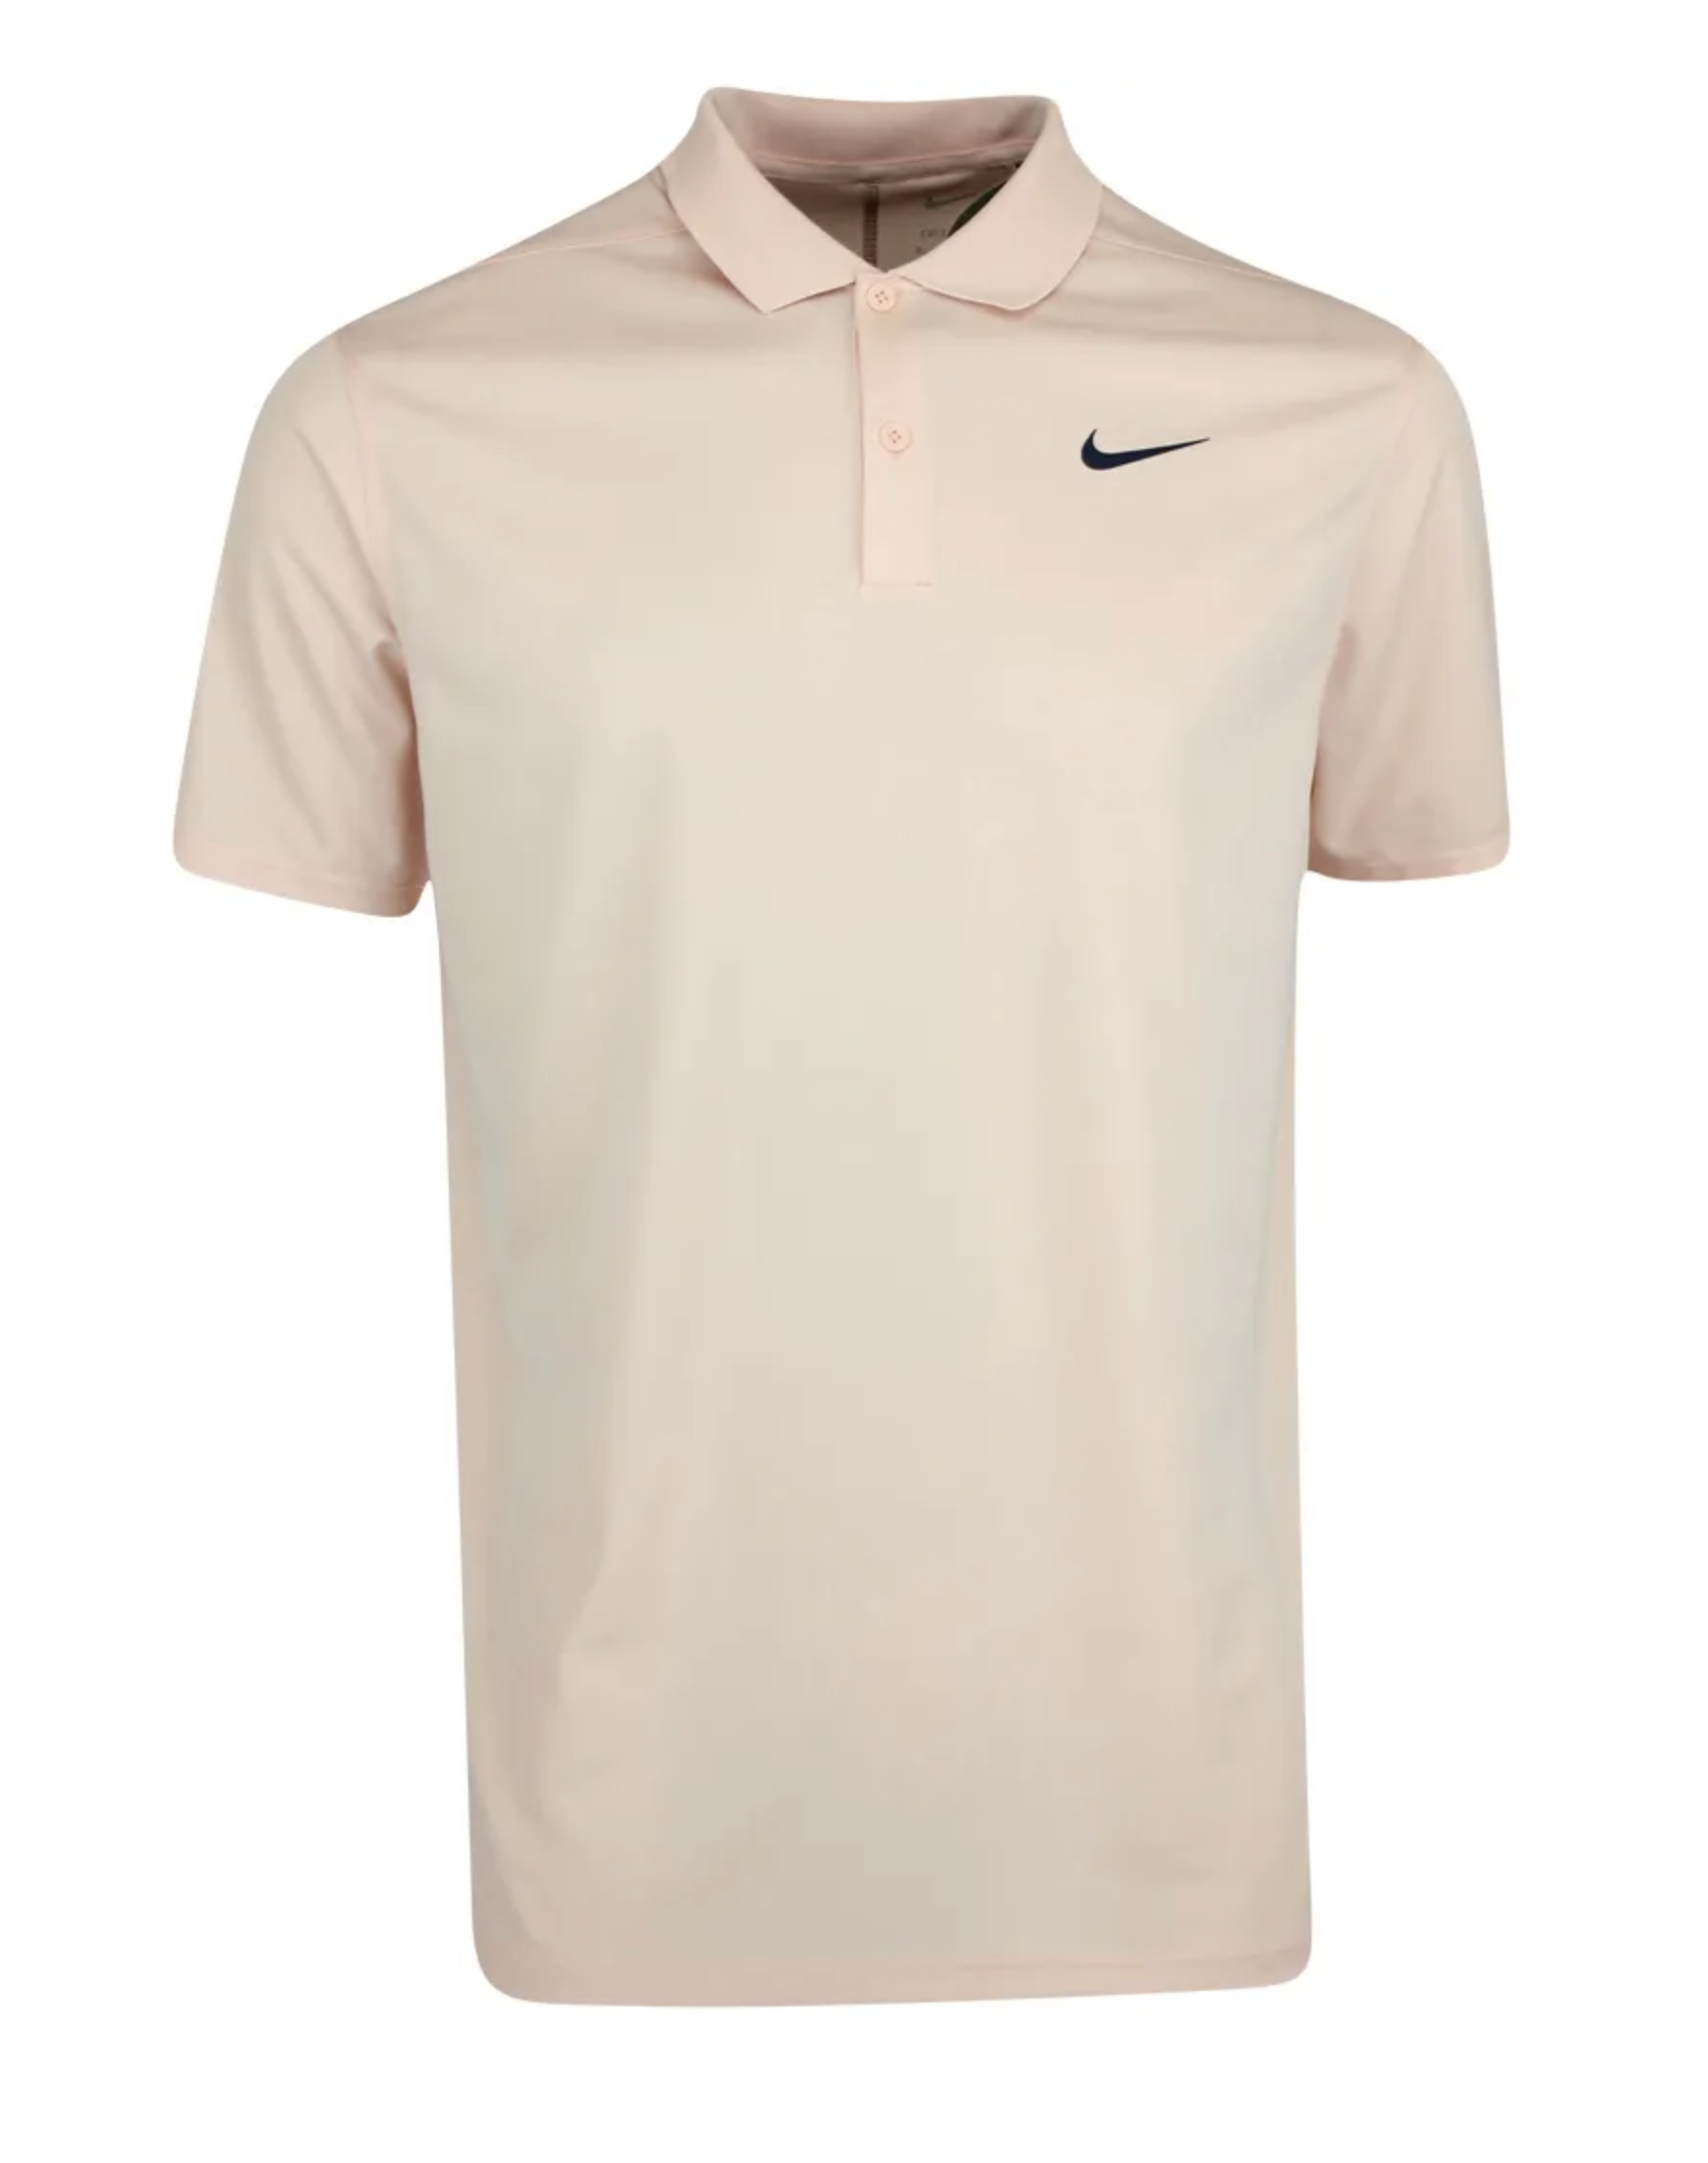 DH0822-800 | Nike DF VCTRY SOLID Polo | Arctic Orange